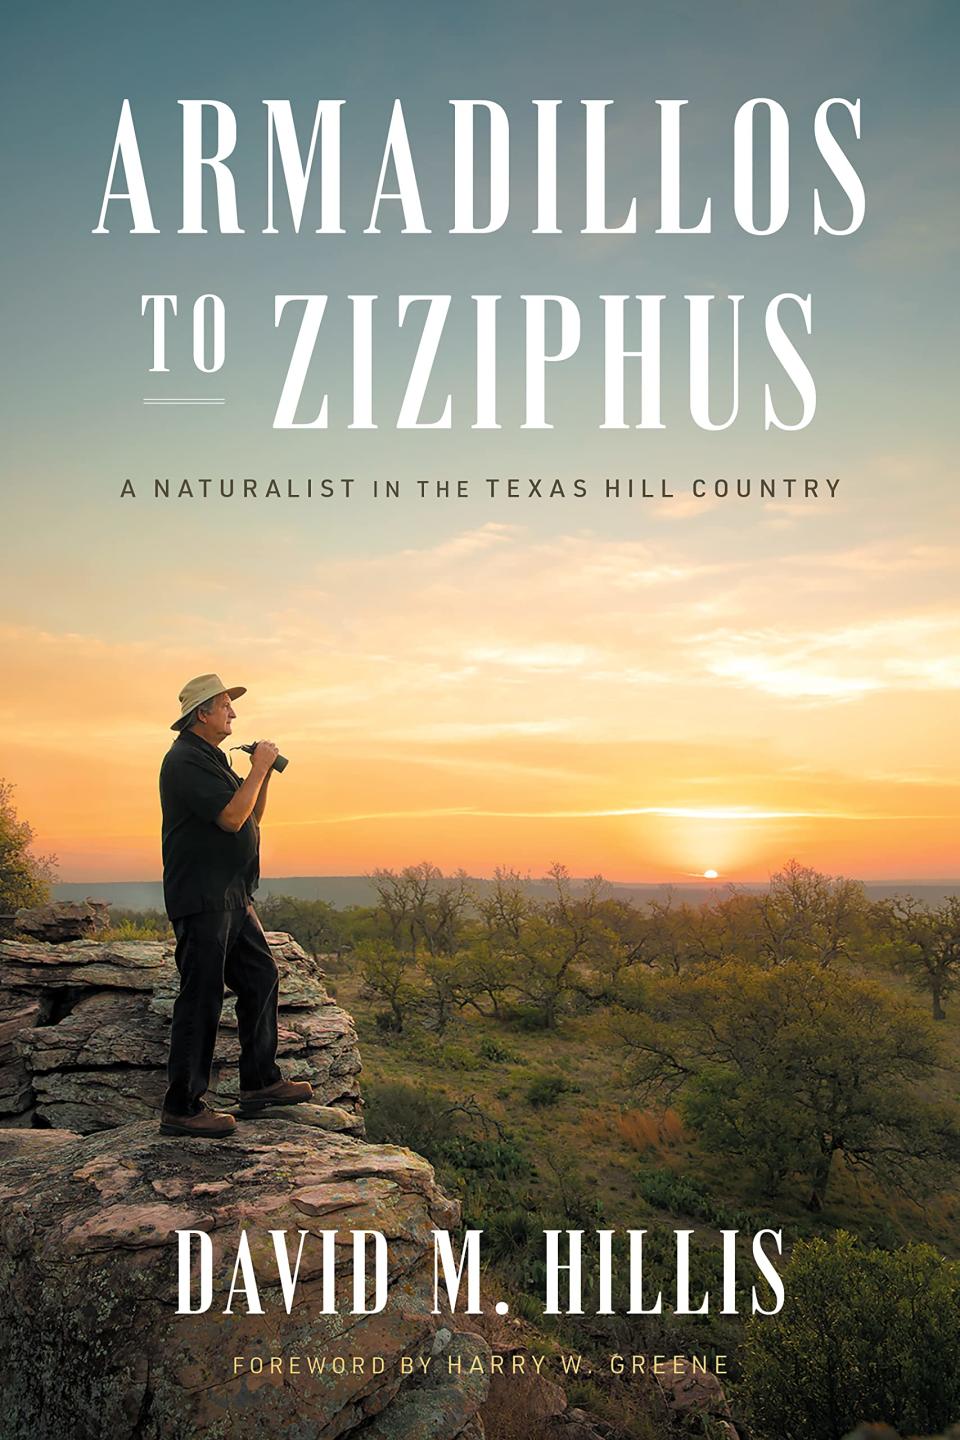 "Armadillos to Ziziphus: A Naturalist in the Texas Hill Country" by David M. Brooks (UT Press)